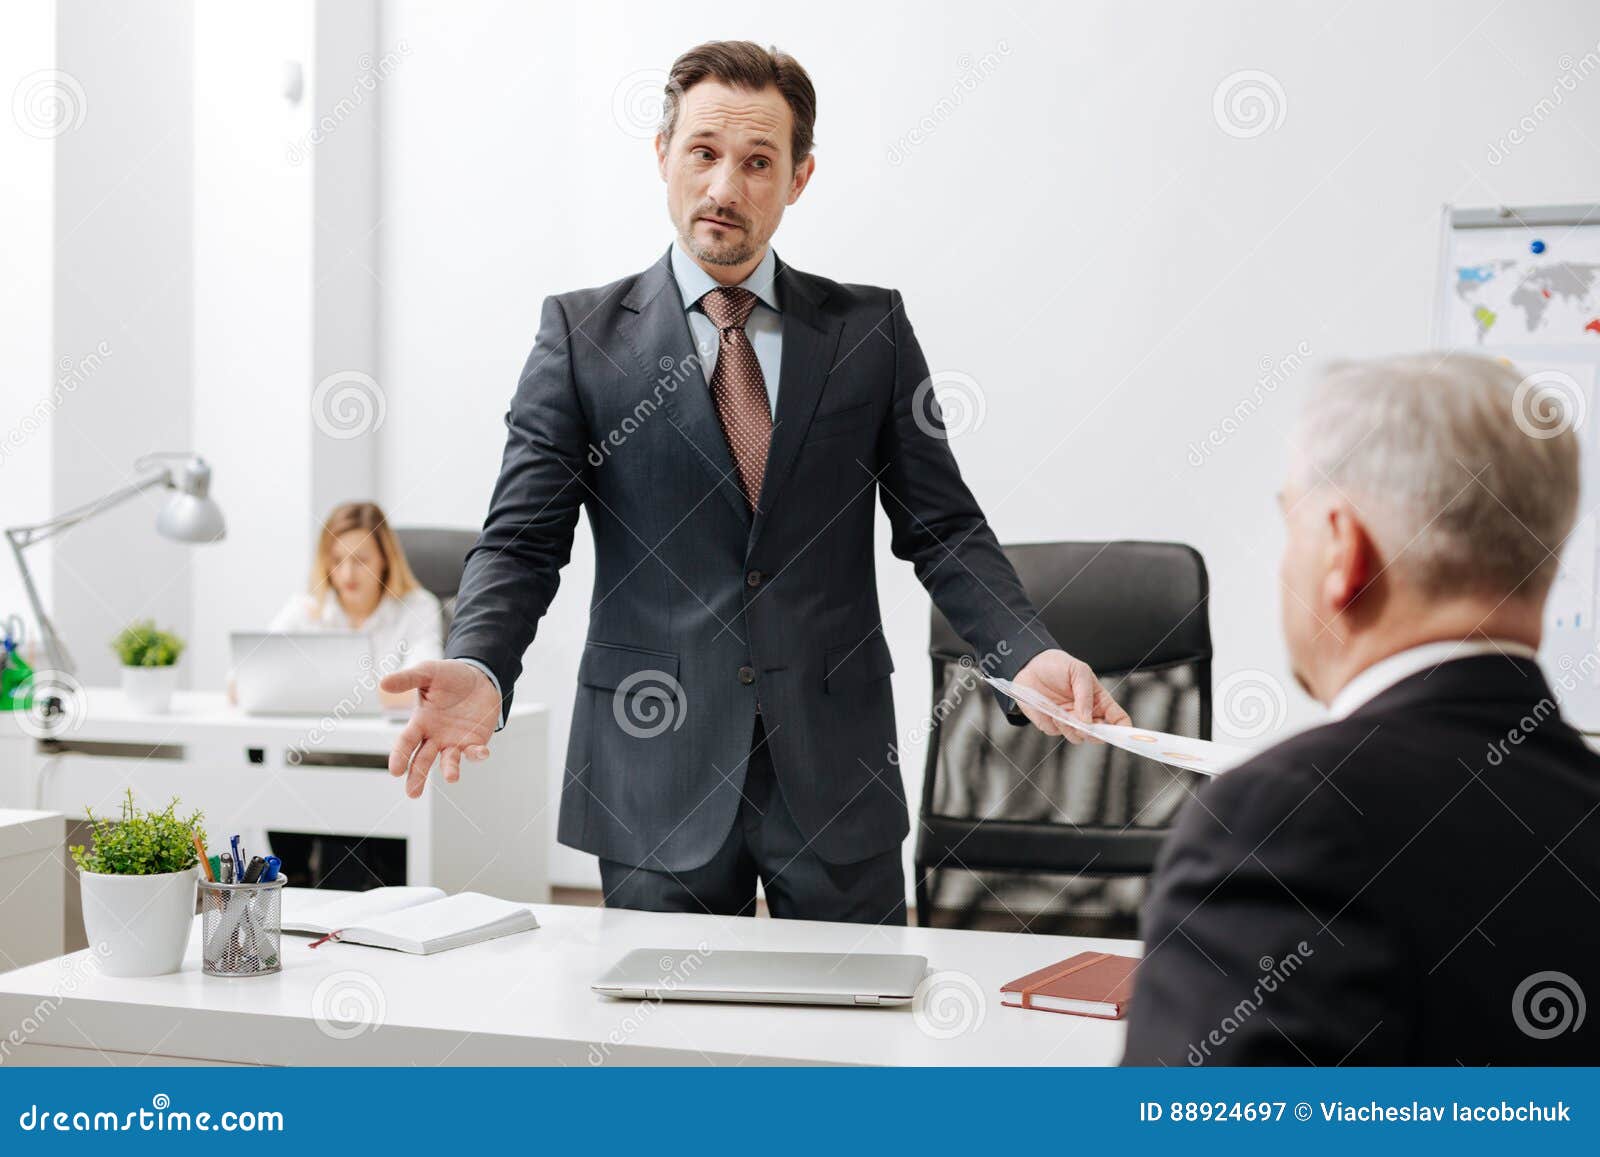 puzzled employer having conversation with colleague in the office